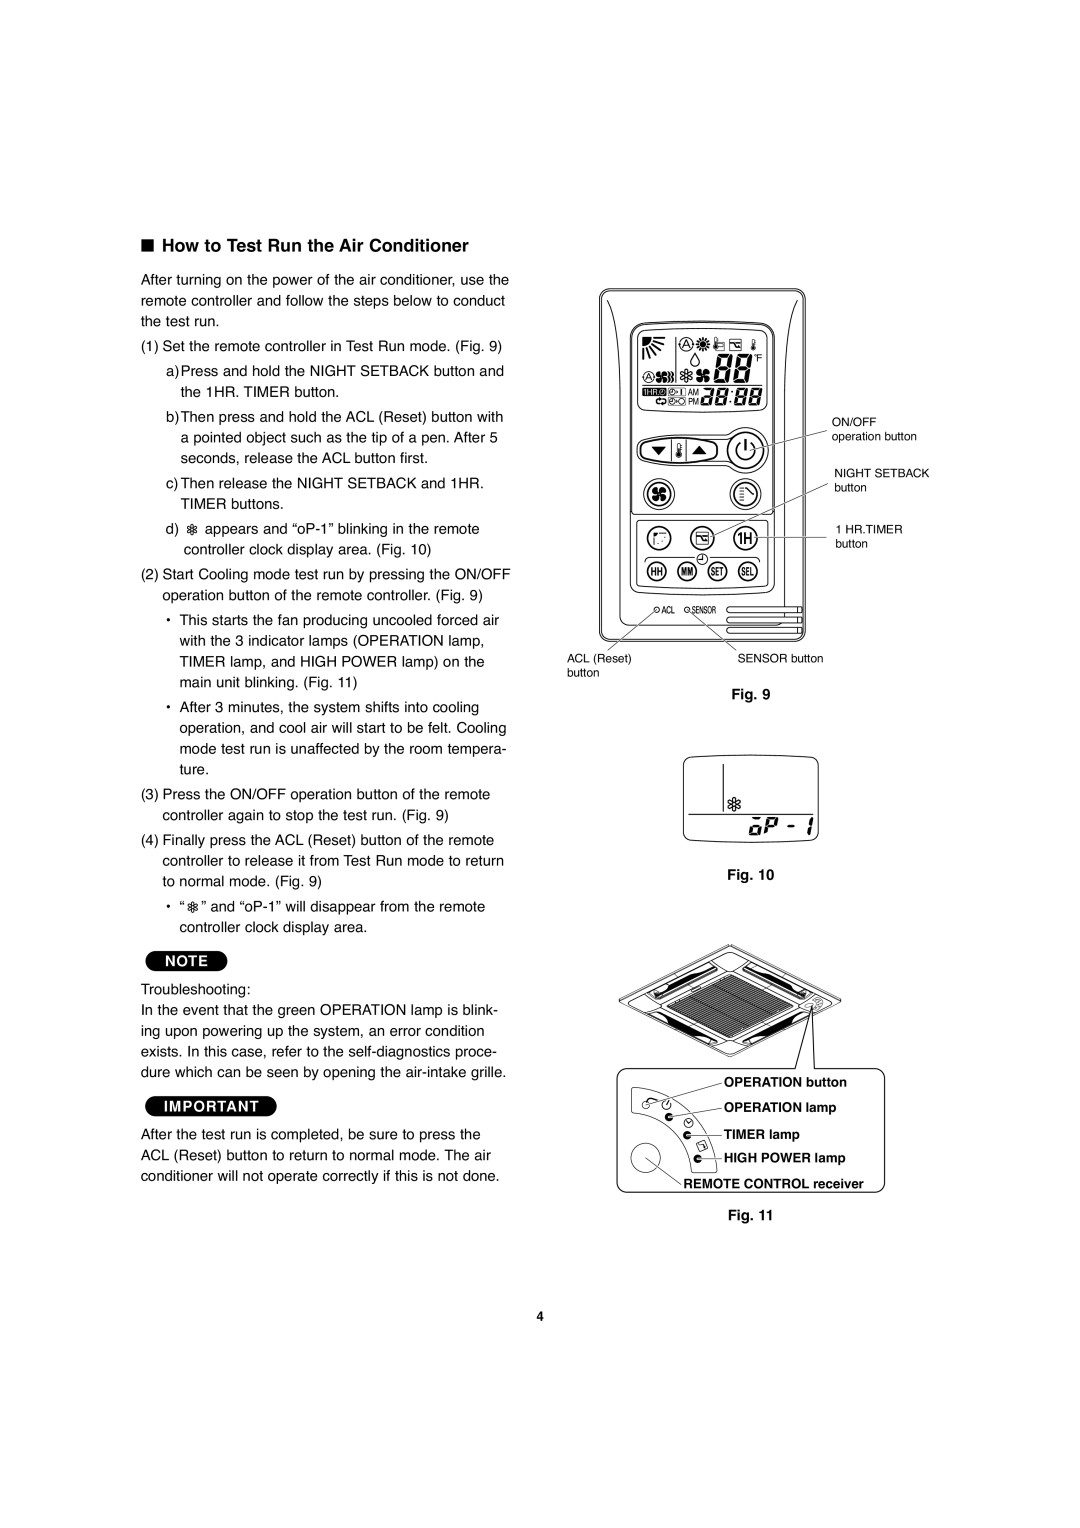 Sanyo XMHS0972, XMHS1272 service manual How to Test Run the Air Conditioner, Fig 